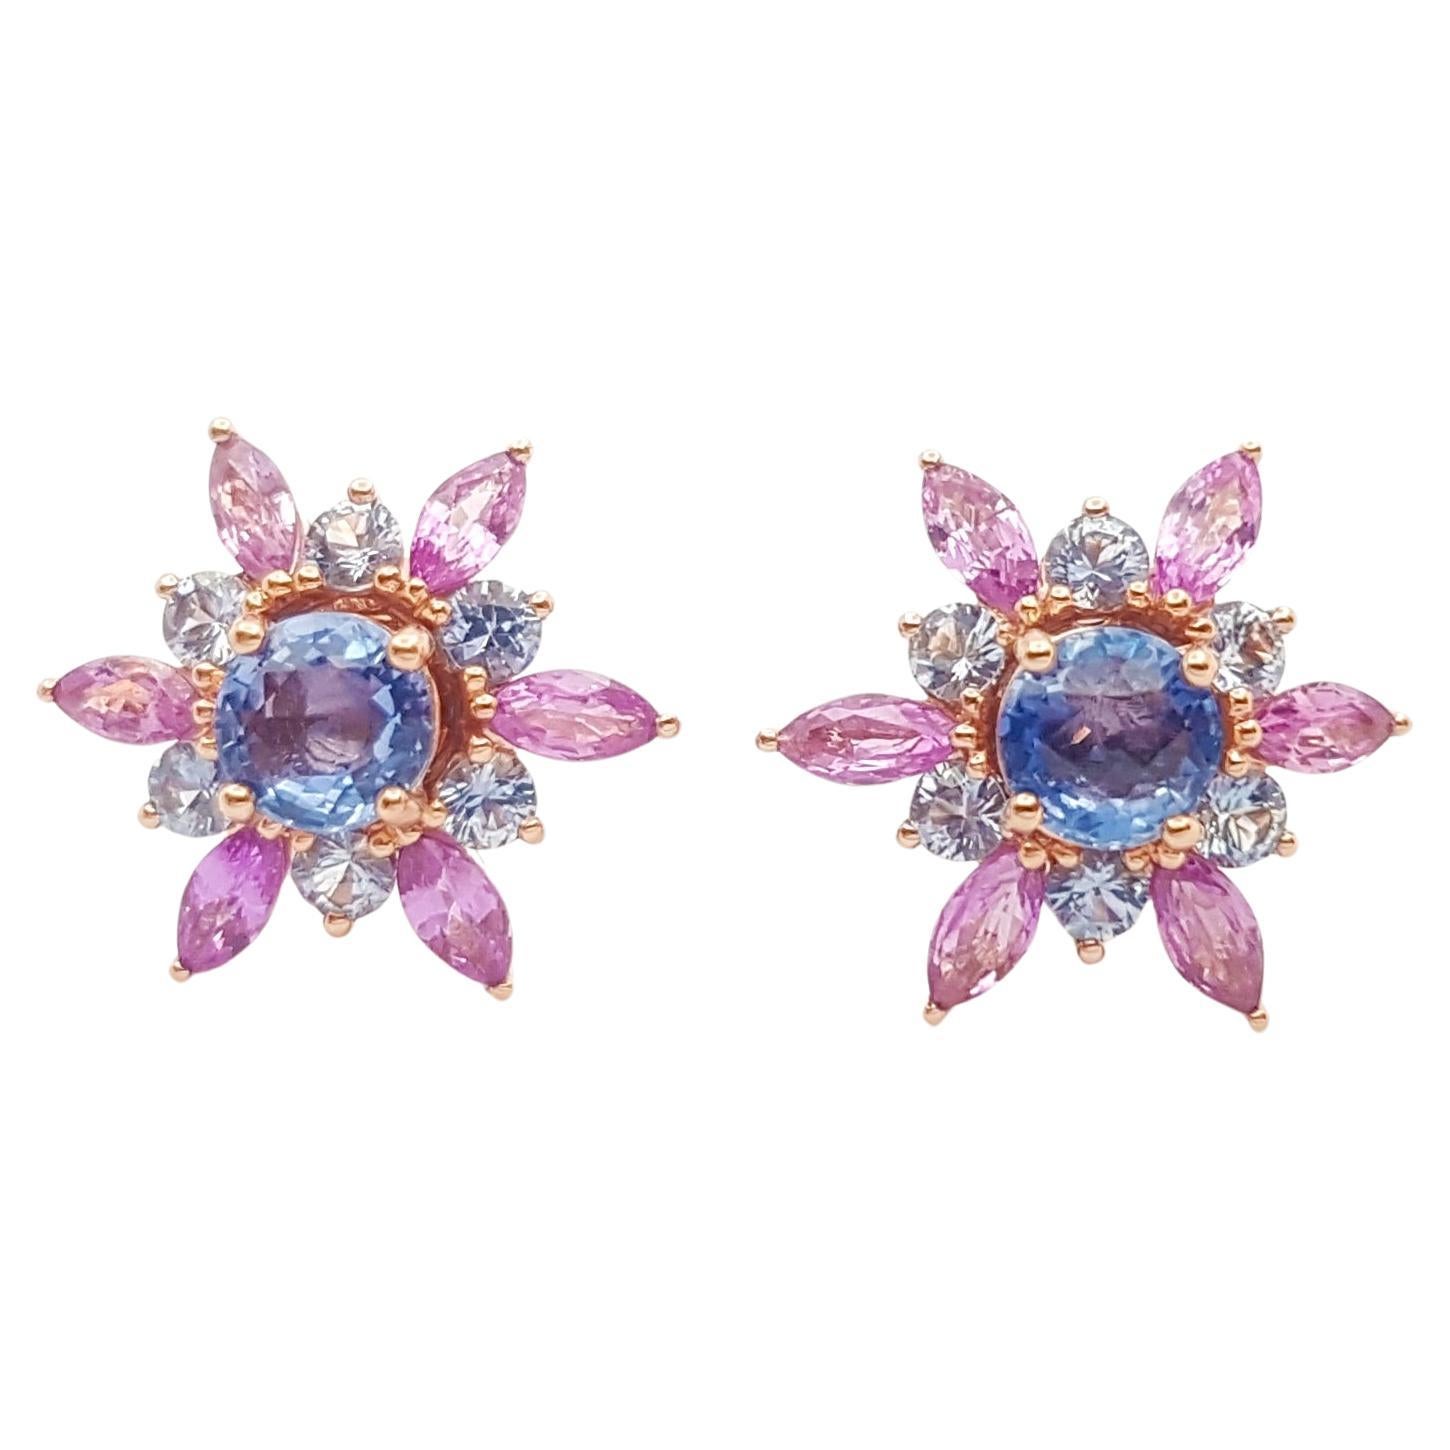 Blue Sapphire and Pink Sapphire Stud and Jacket Earrings set in 18K Rose Gold